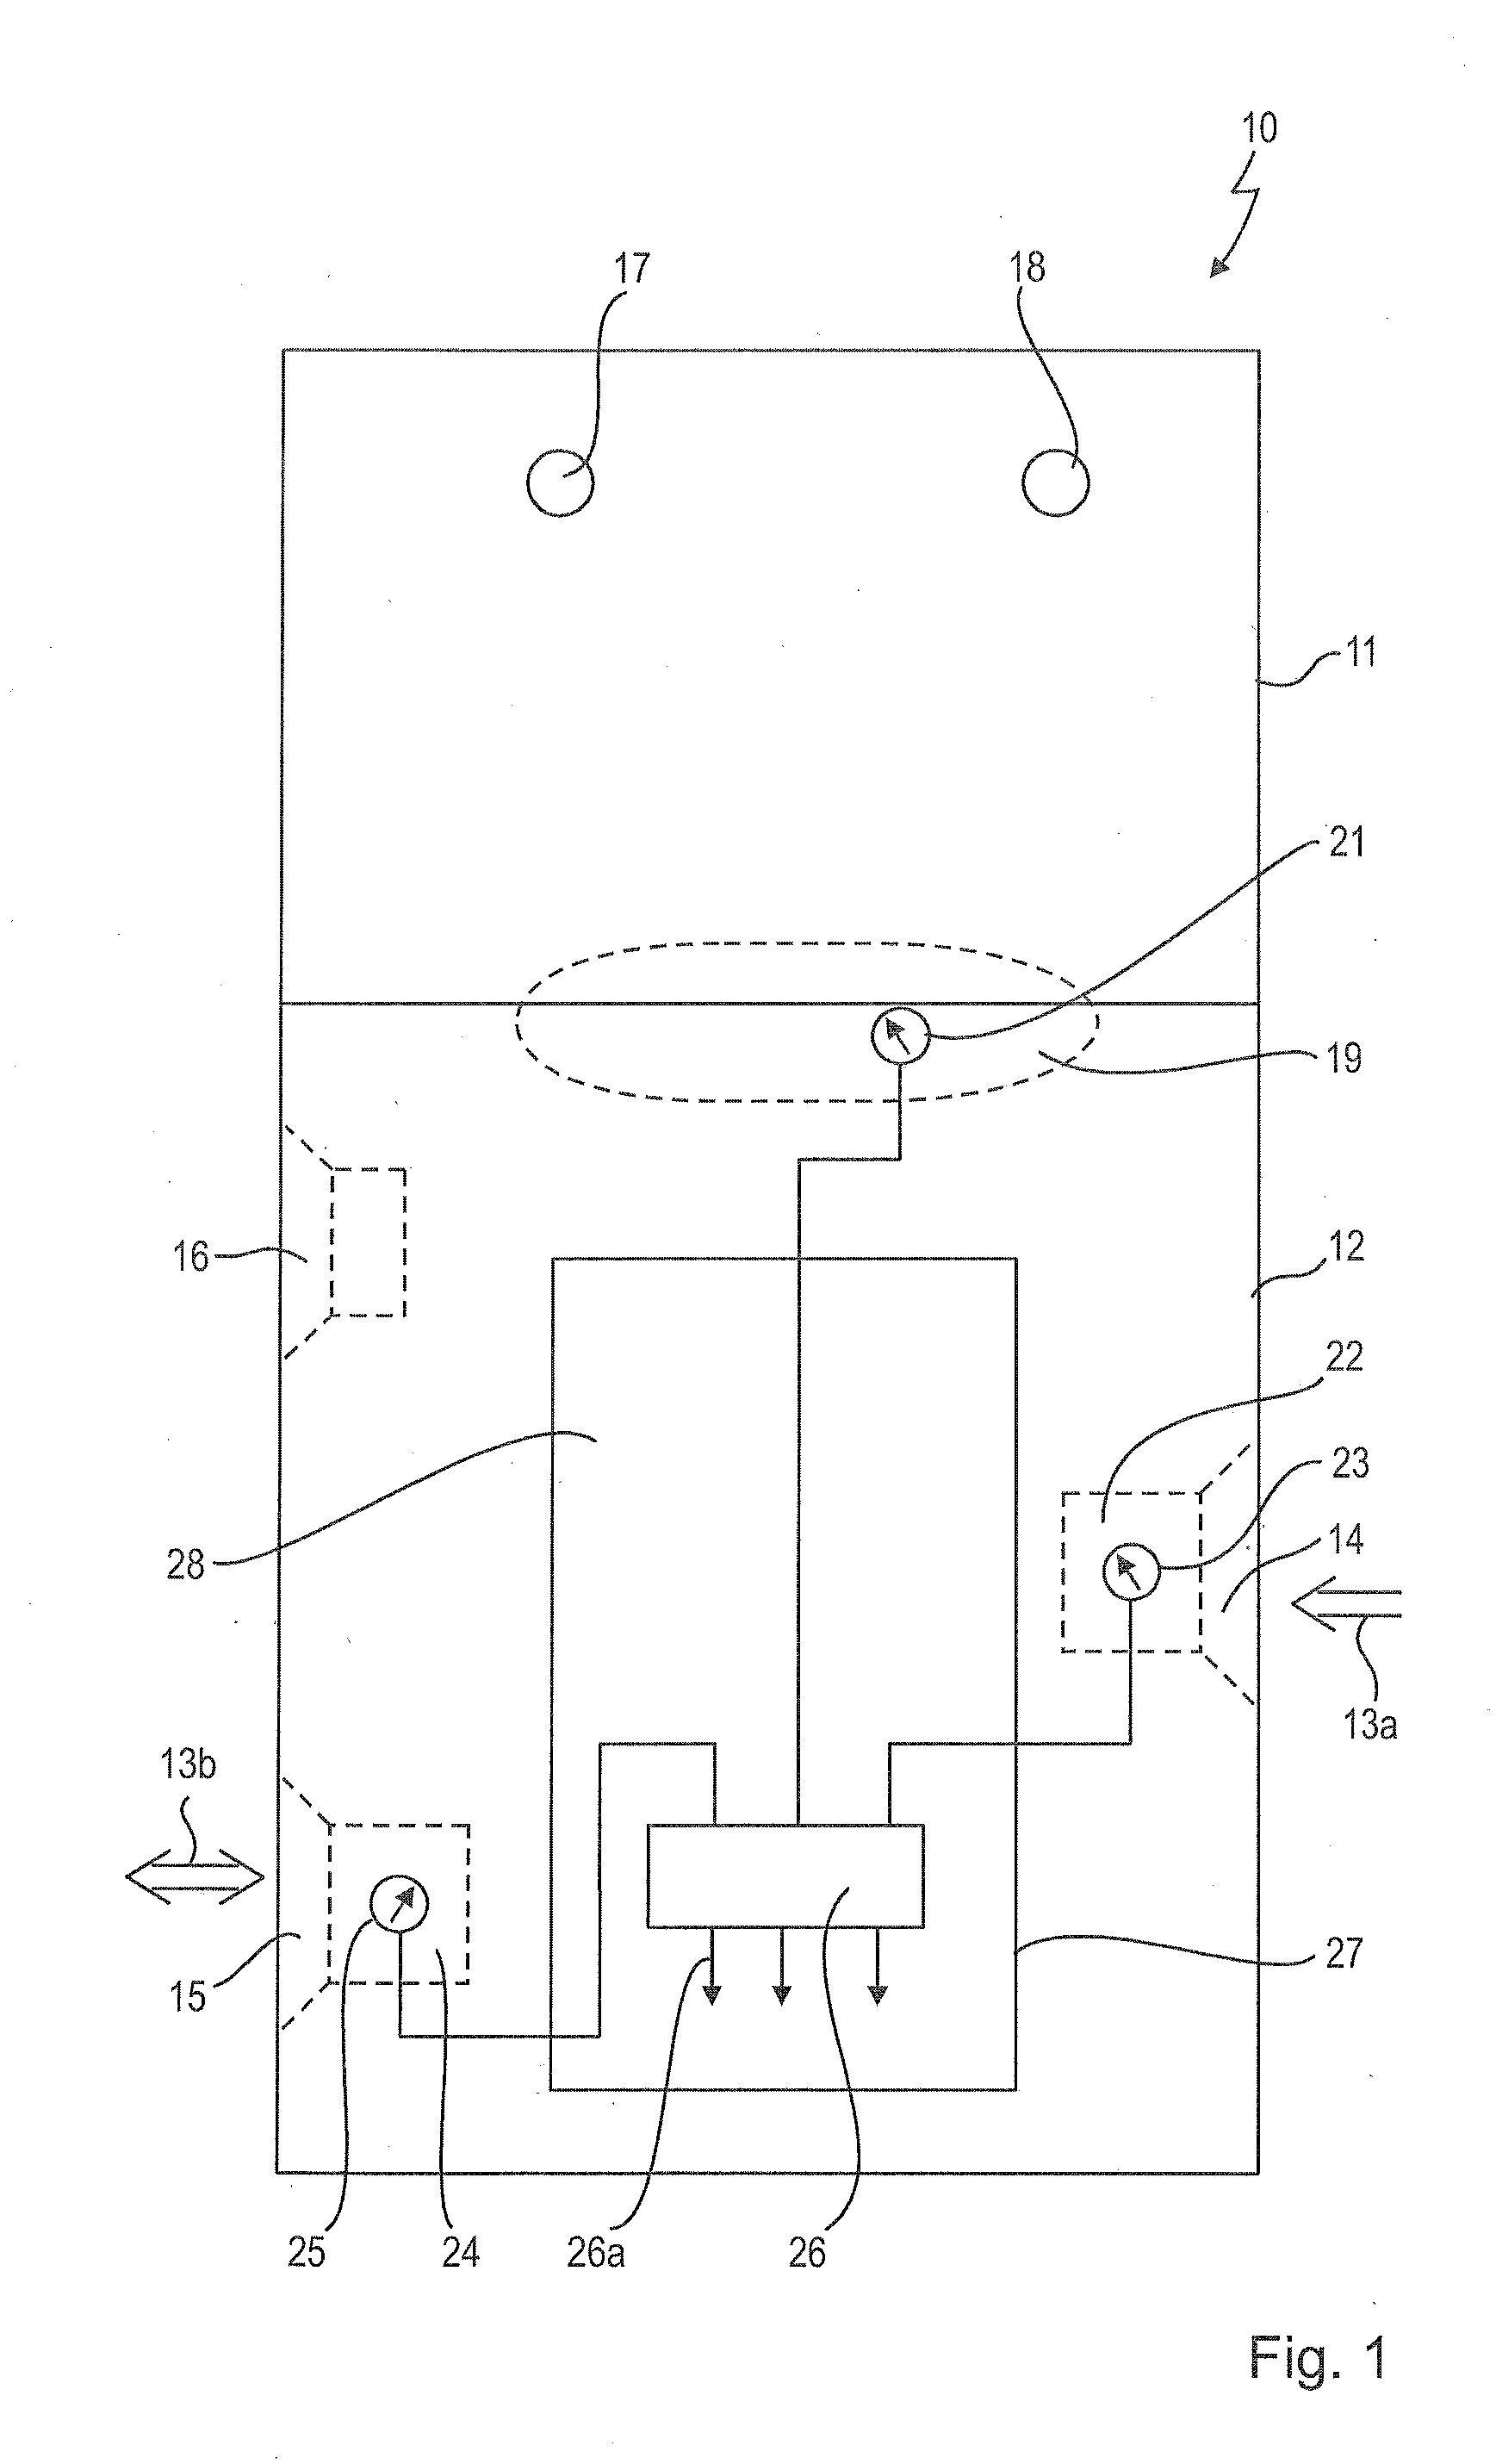 Device for providing a fluid having regulated output pressure